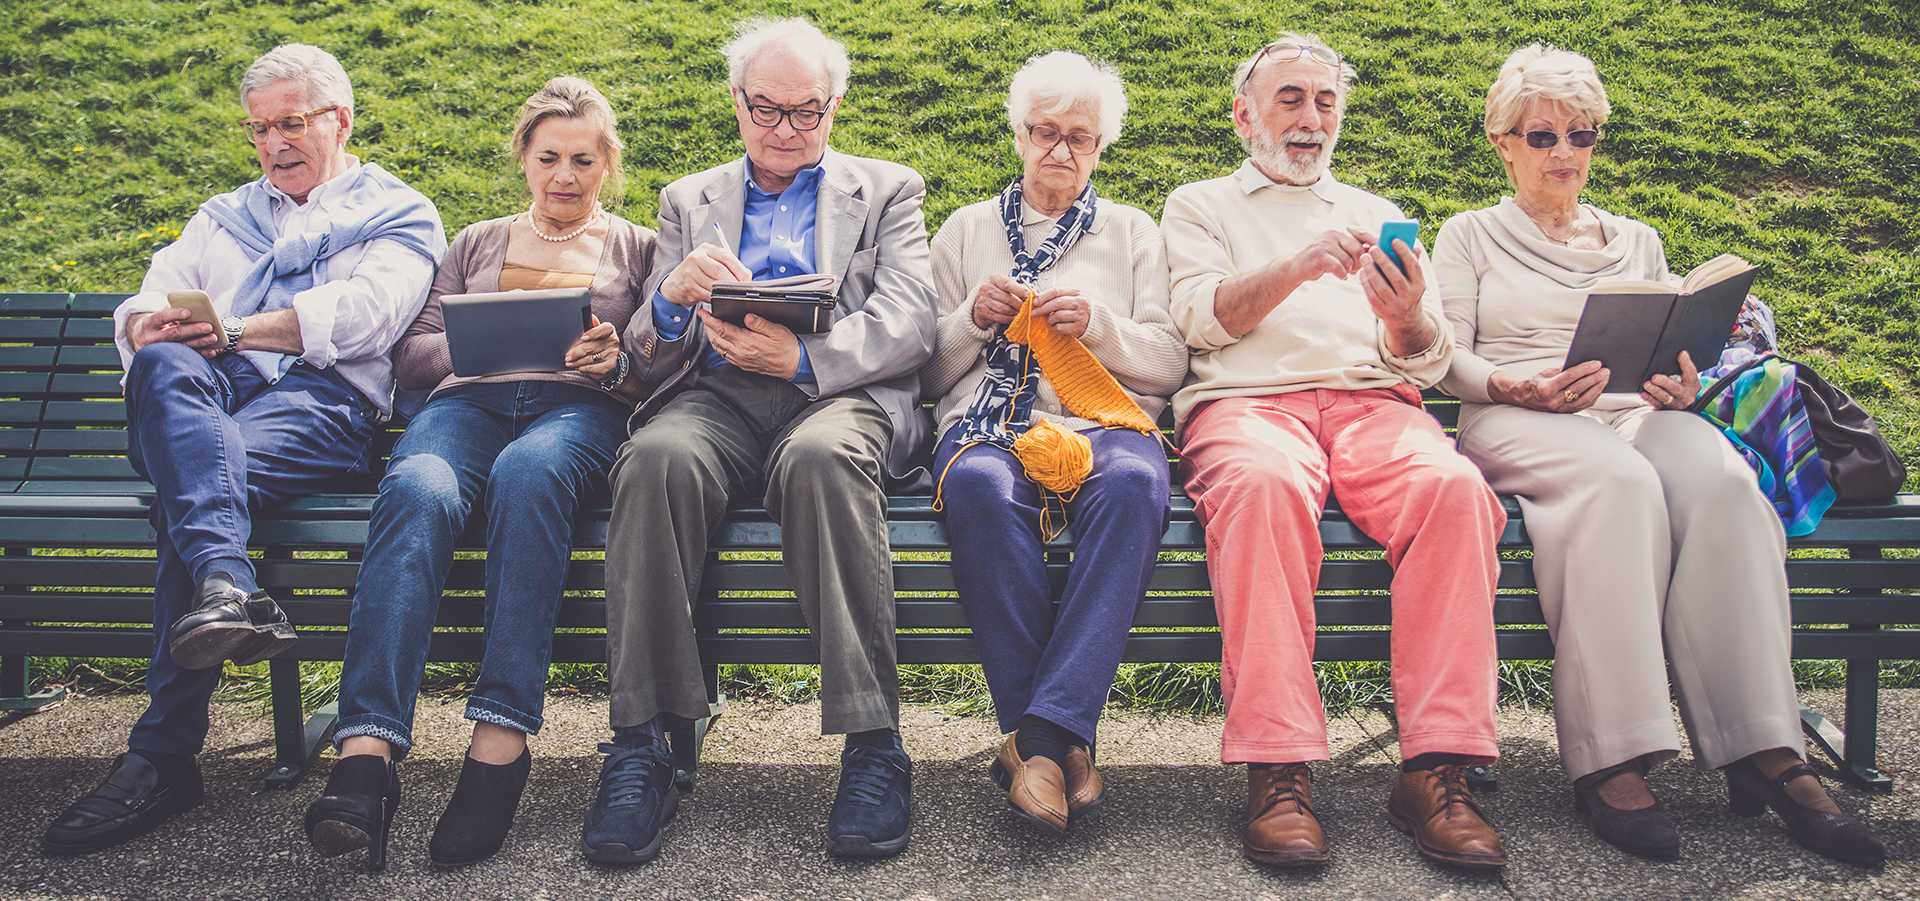 A number of retirement community residents sitting on a park bench